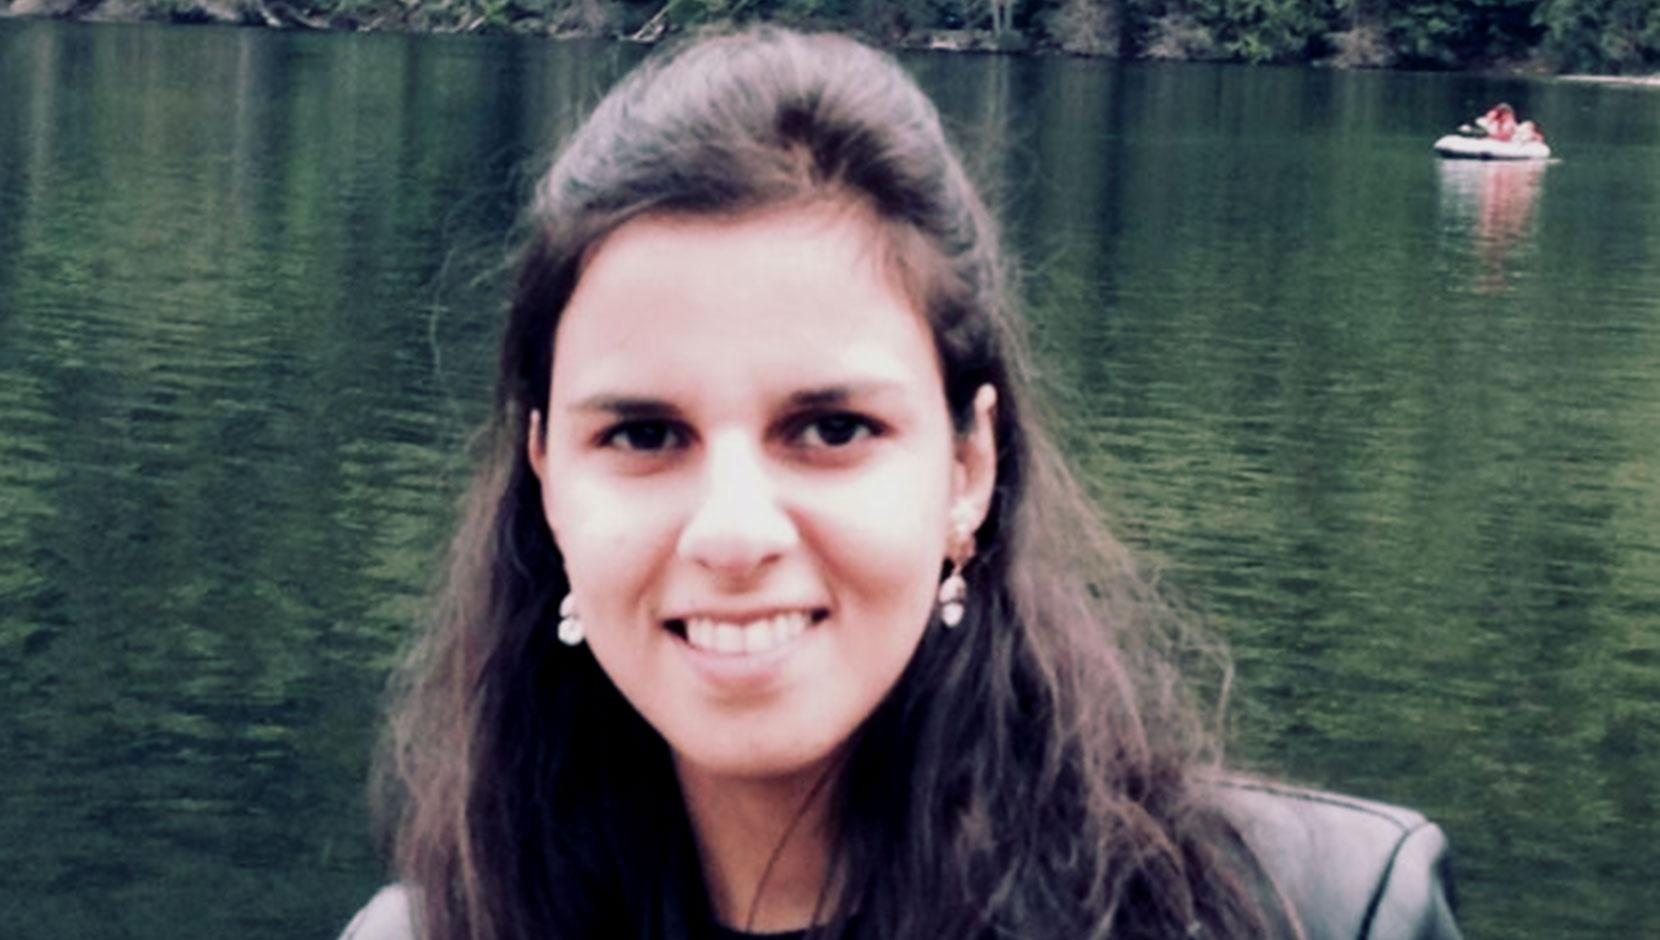 Mehrnoush smiling at the camera. She is in front of a body of water, with shoulder length brown hair pulled back partially.